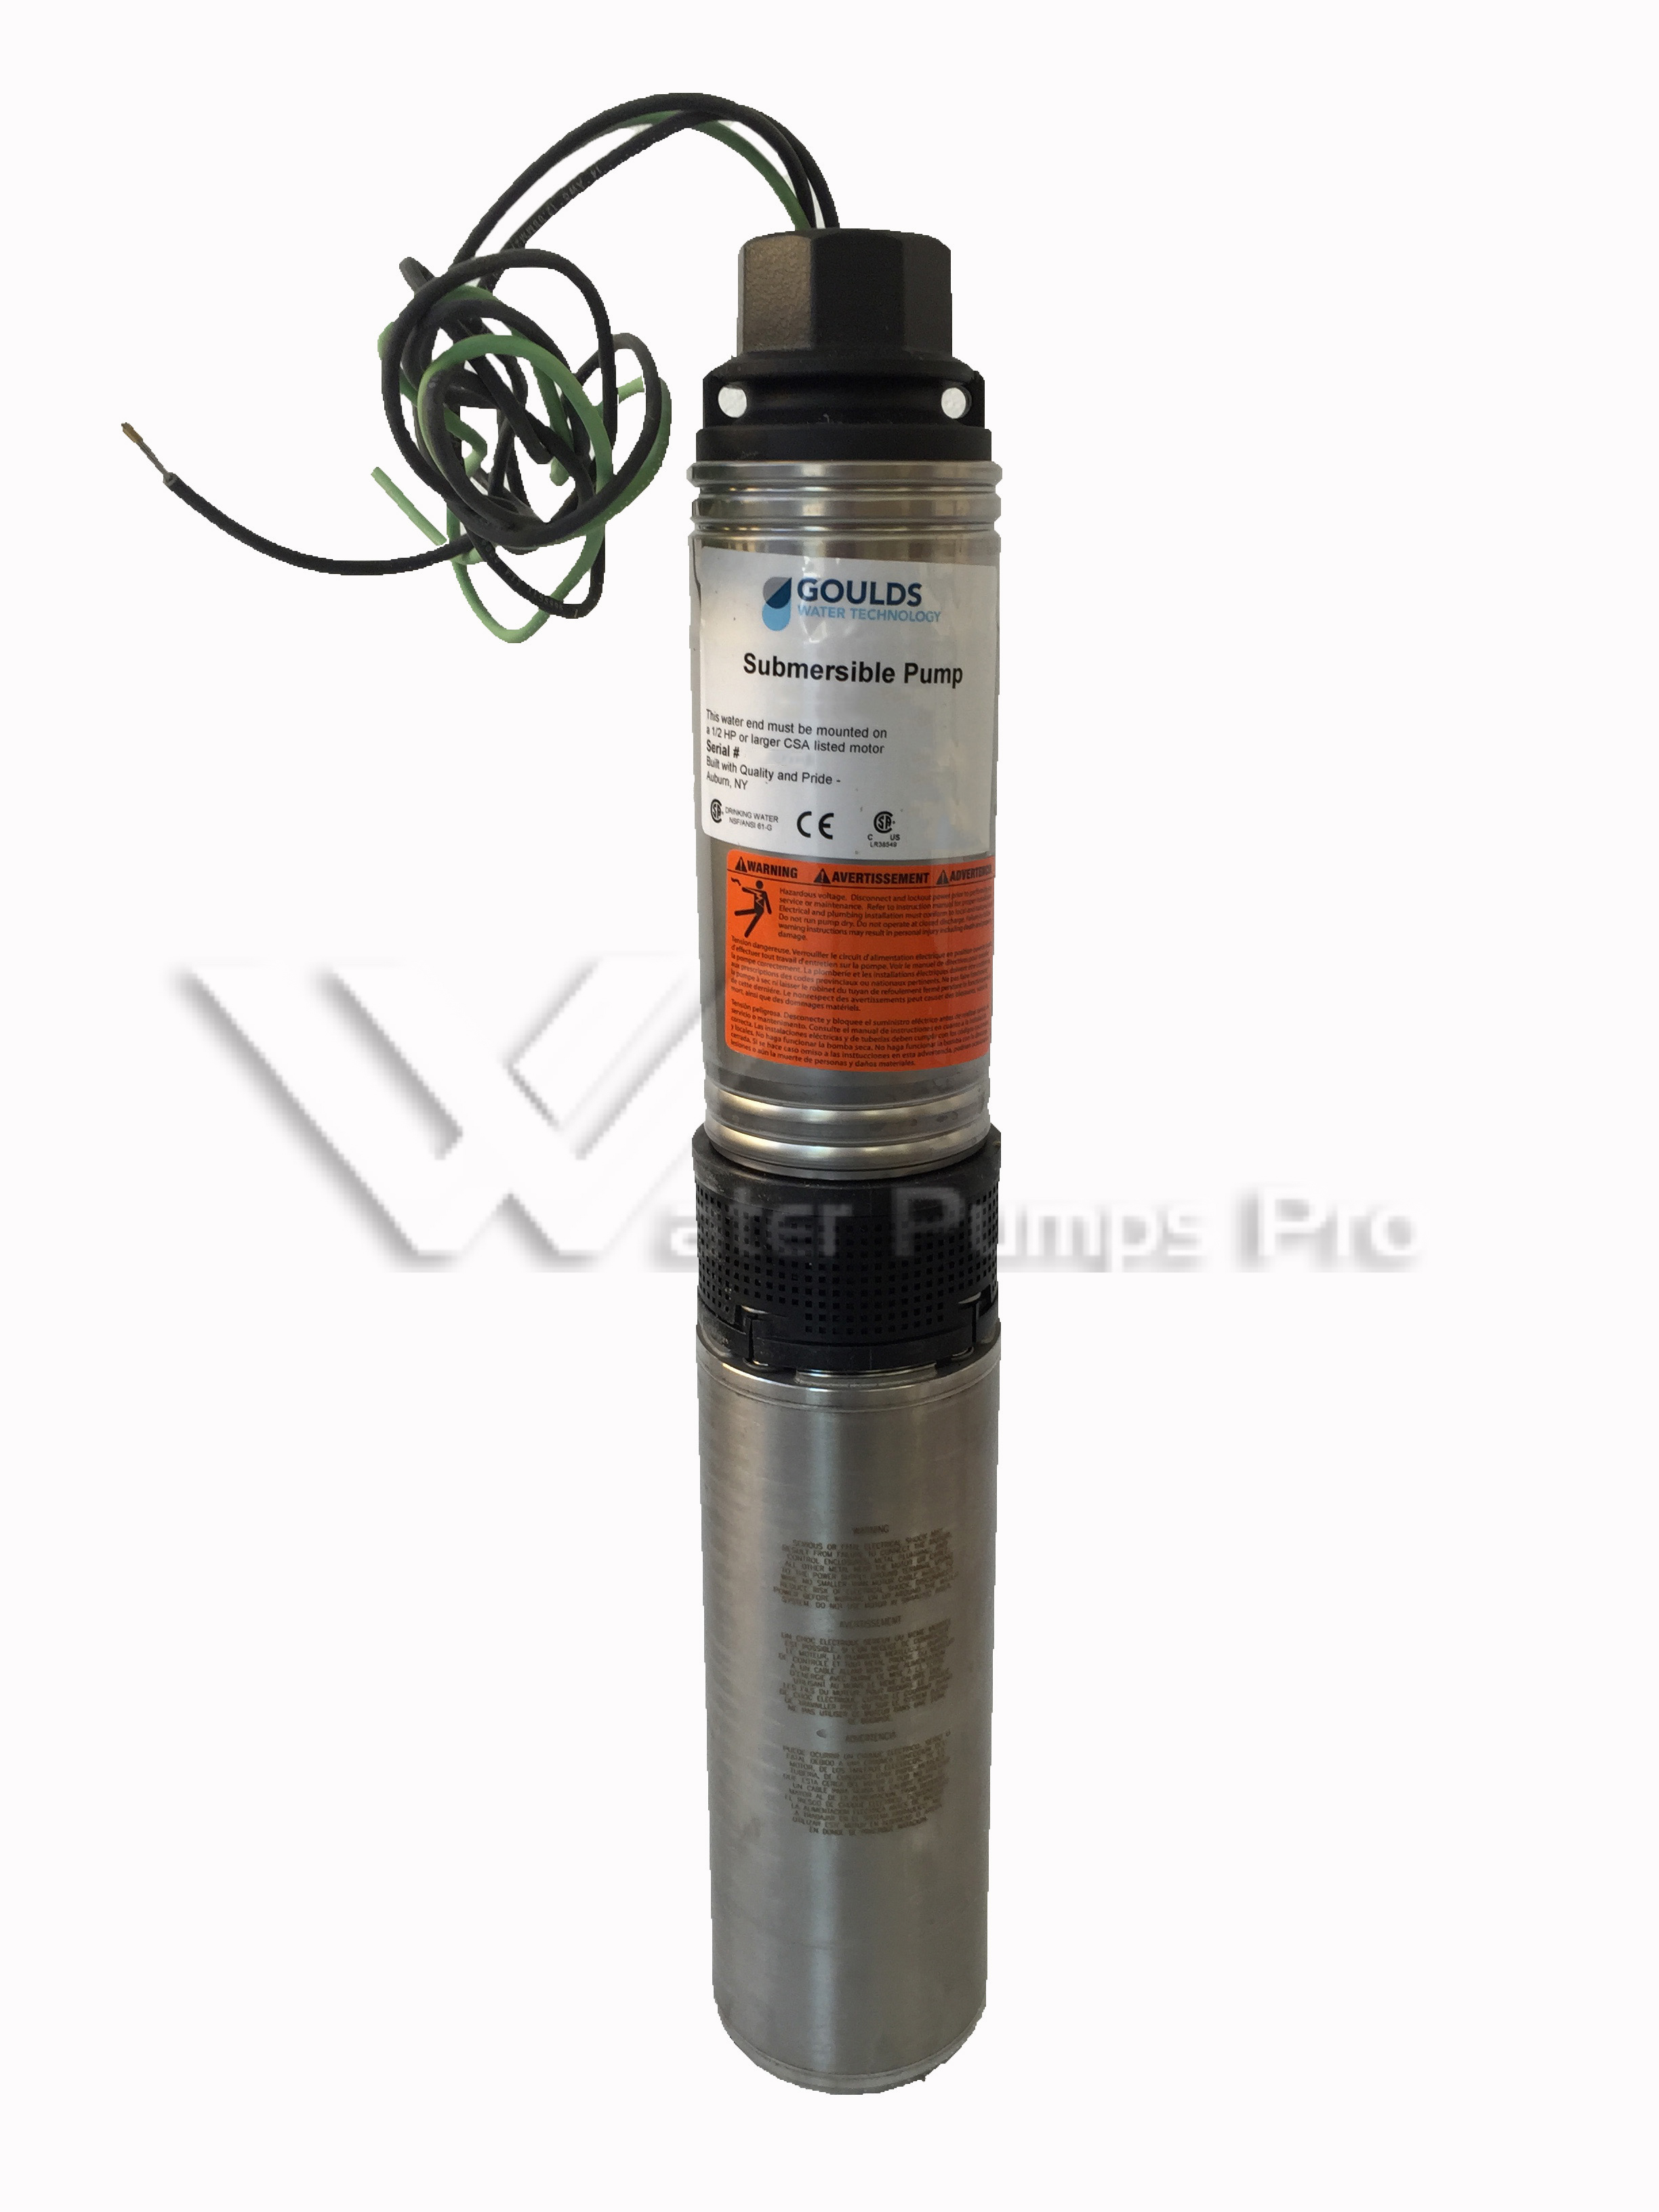 Goulds 18HS07422C Submersible Water Well Pump 3/4HP 230V 2Wire